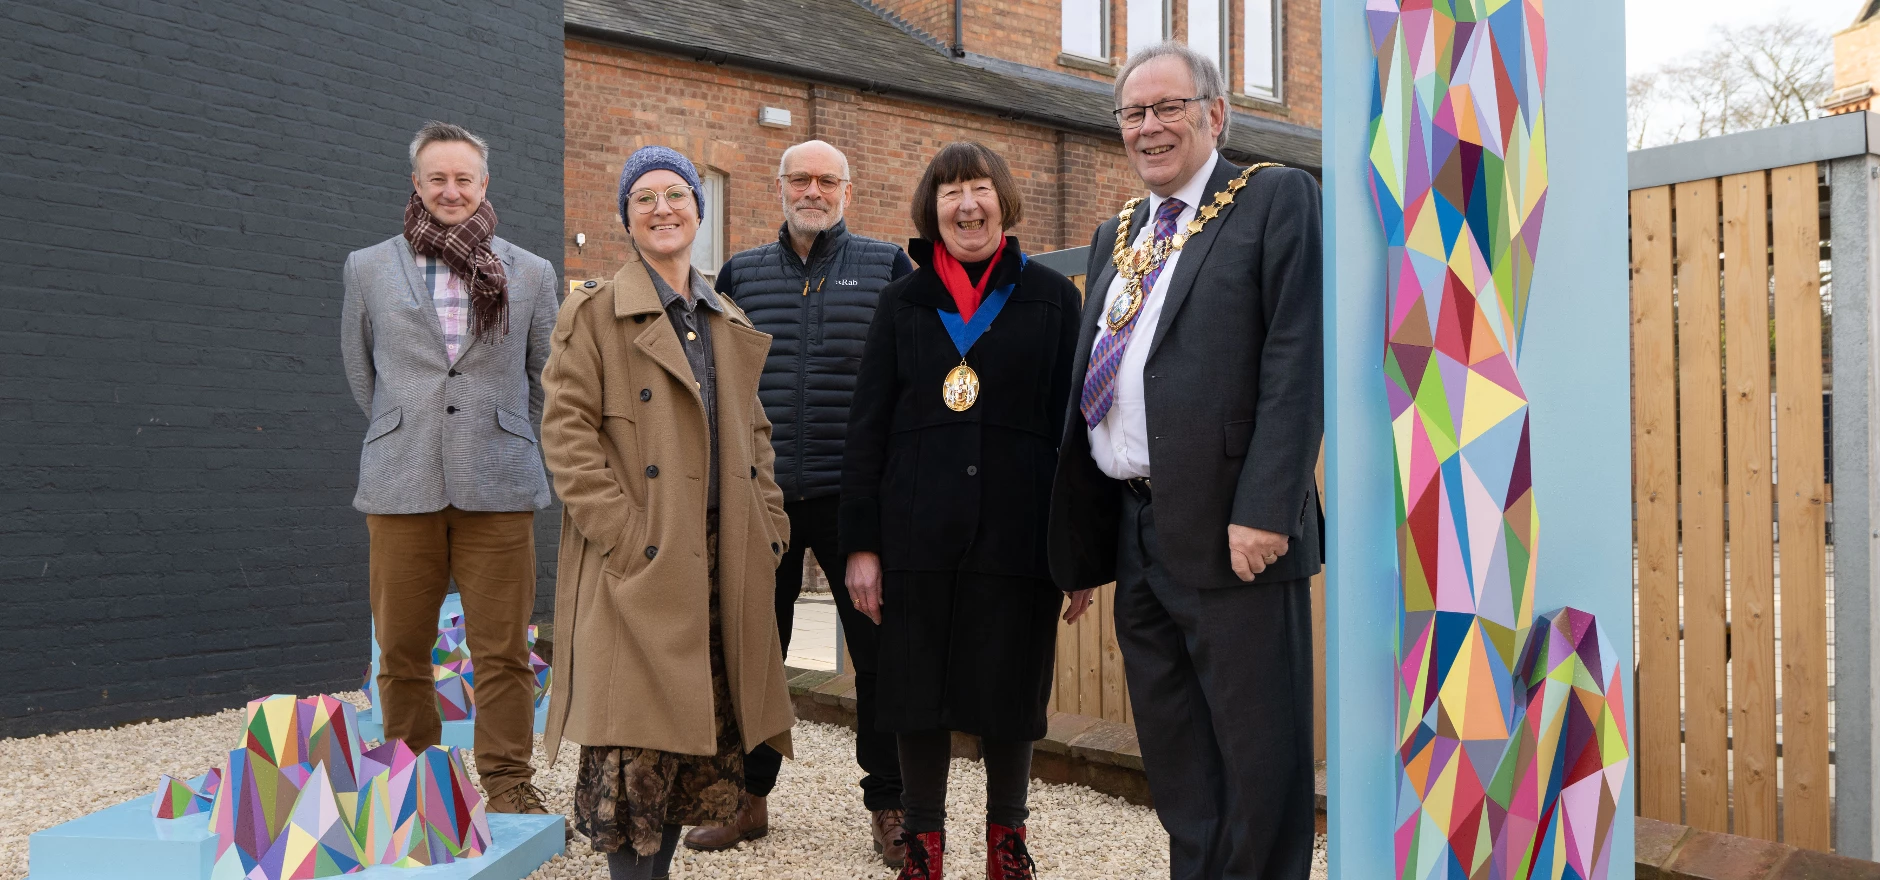 From the left, James Brookes (Complex Development Projects), Lucy Tomlins (Pangaea Sculptors' Centre), Cllr Chris King (Warwick District Council), Cllr Sidney Syson (Warwick District Council) and Mayor of Leamington Spa Cllr Alan Boad